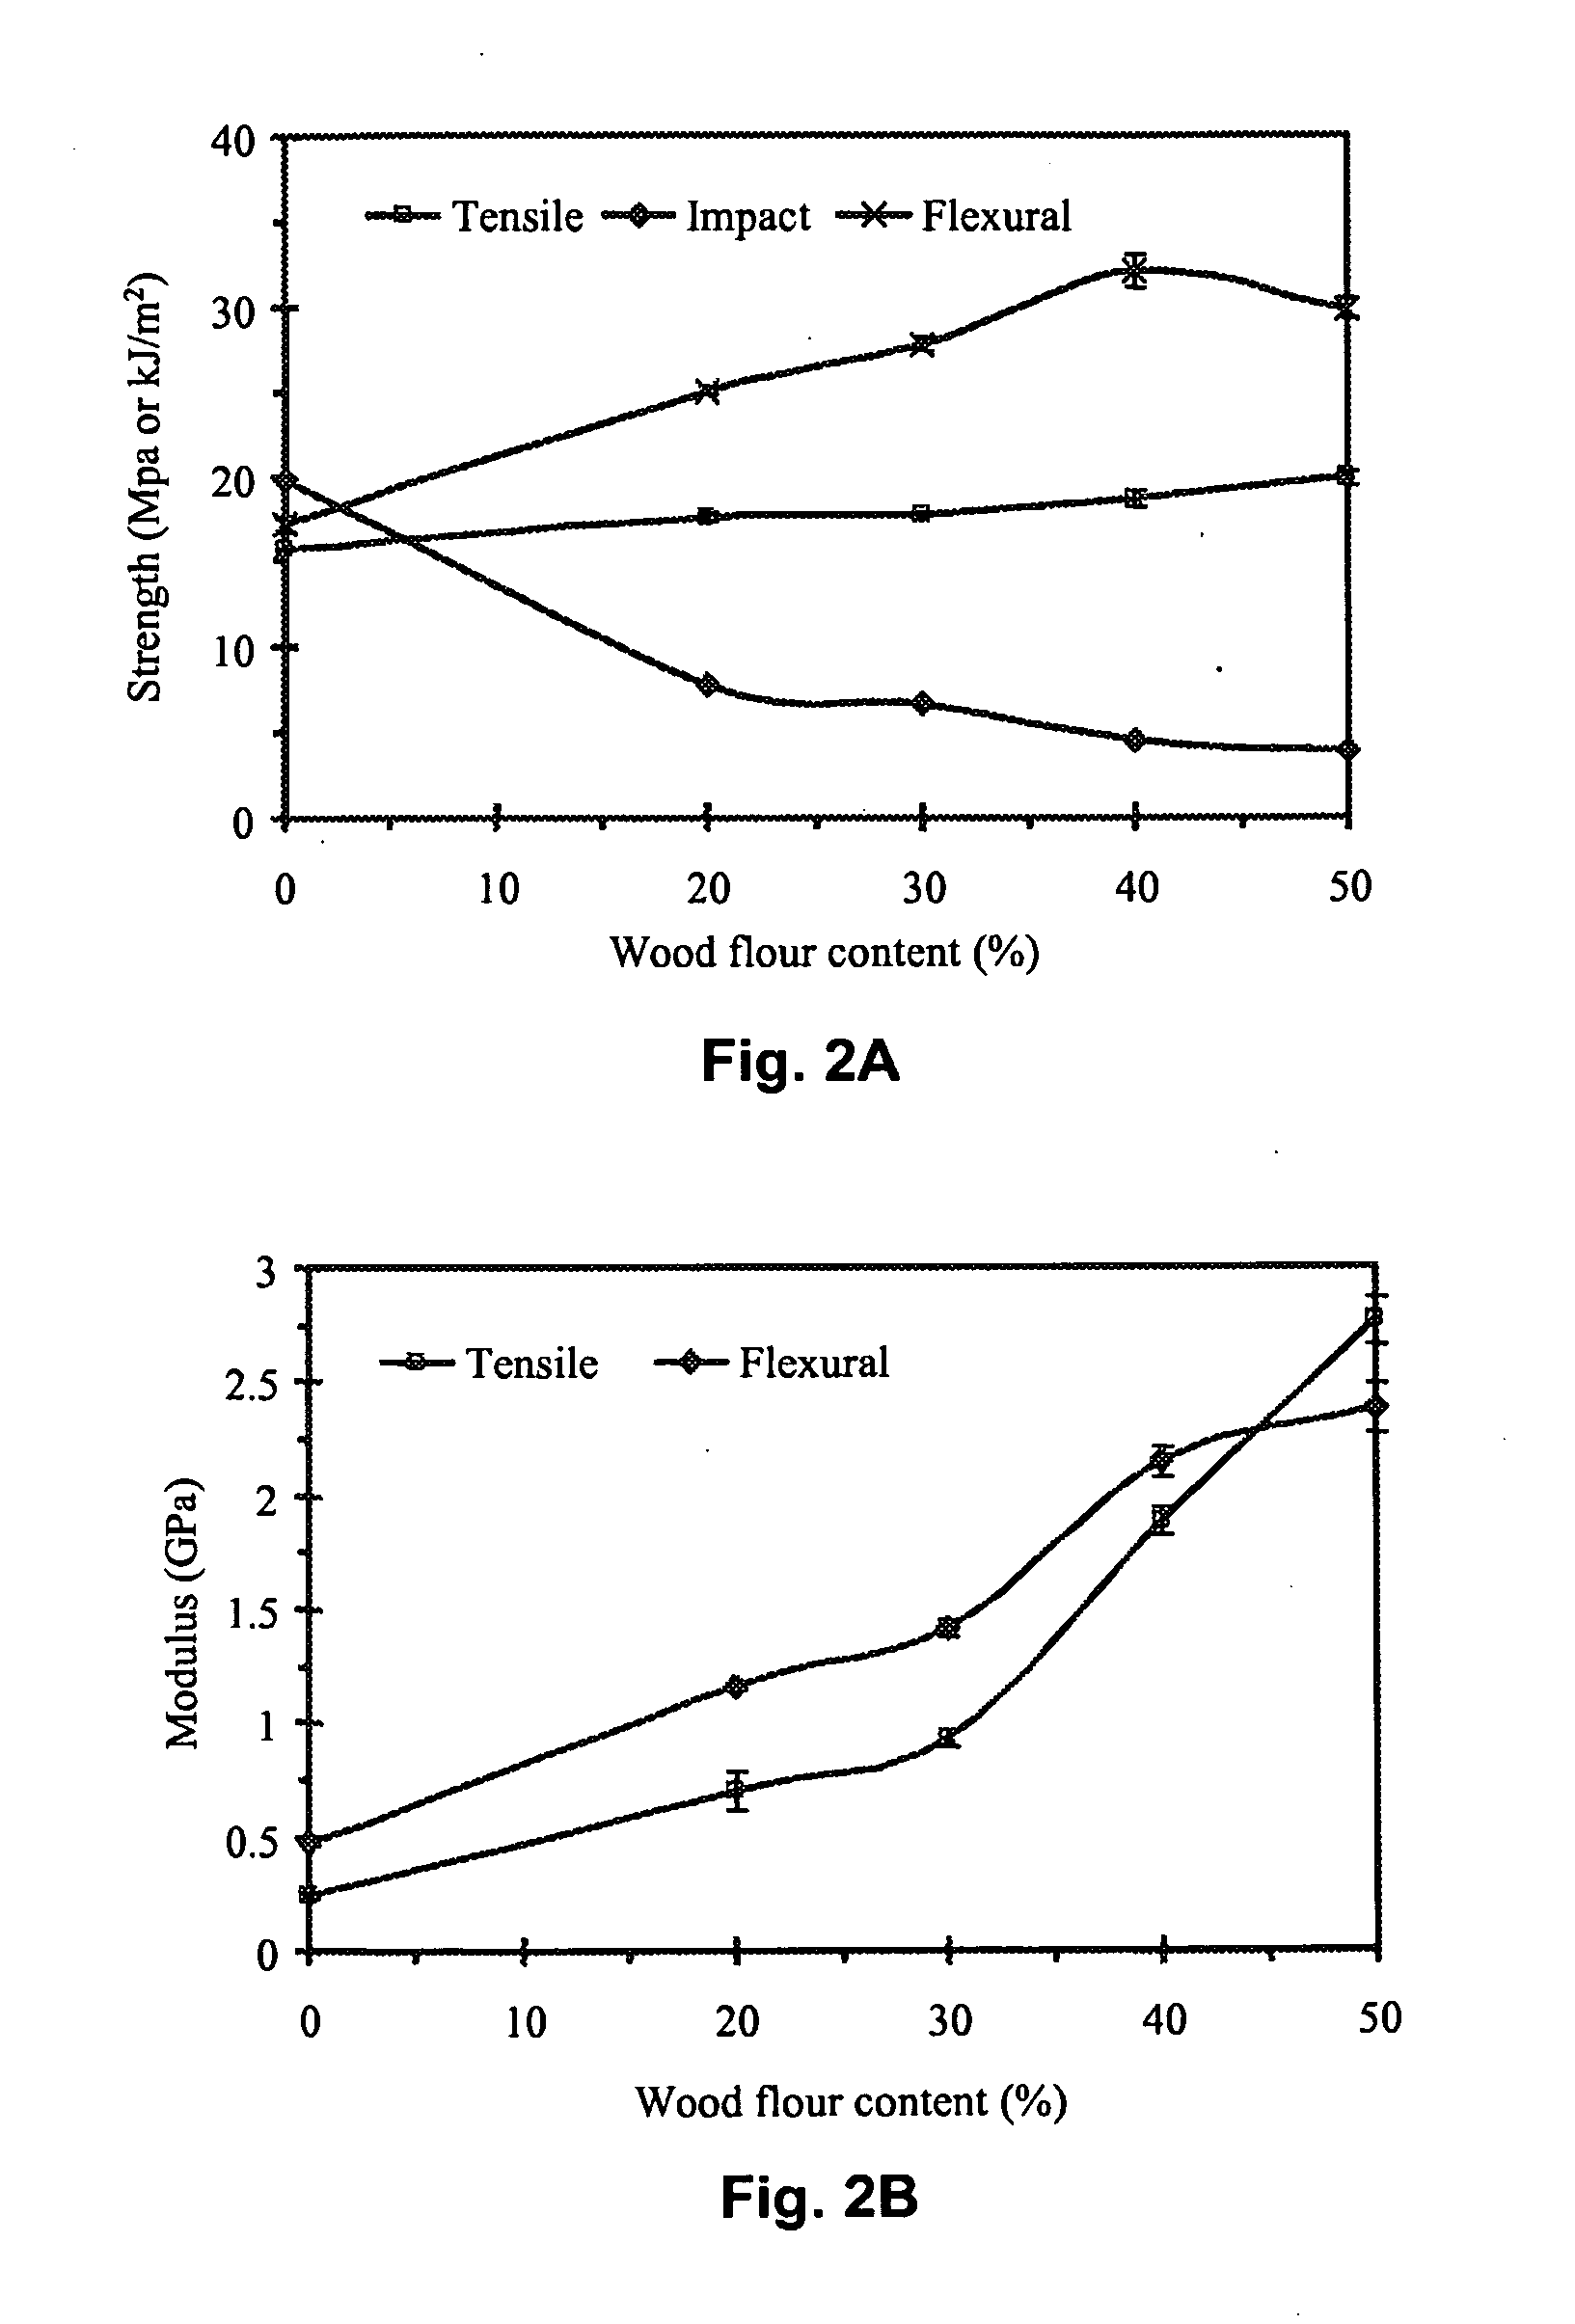 Composites Made of Thermoplastic Polymers, Residual Oil, and Cellulosic Fibers